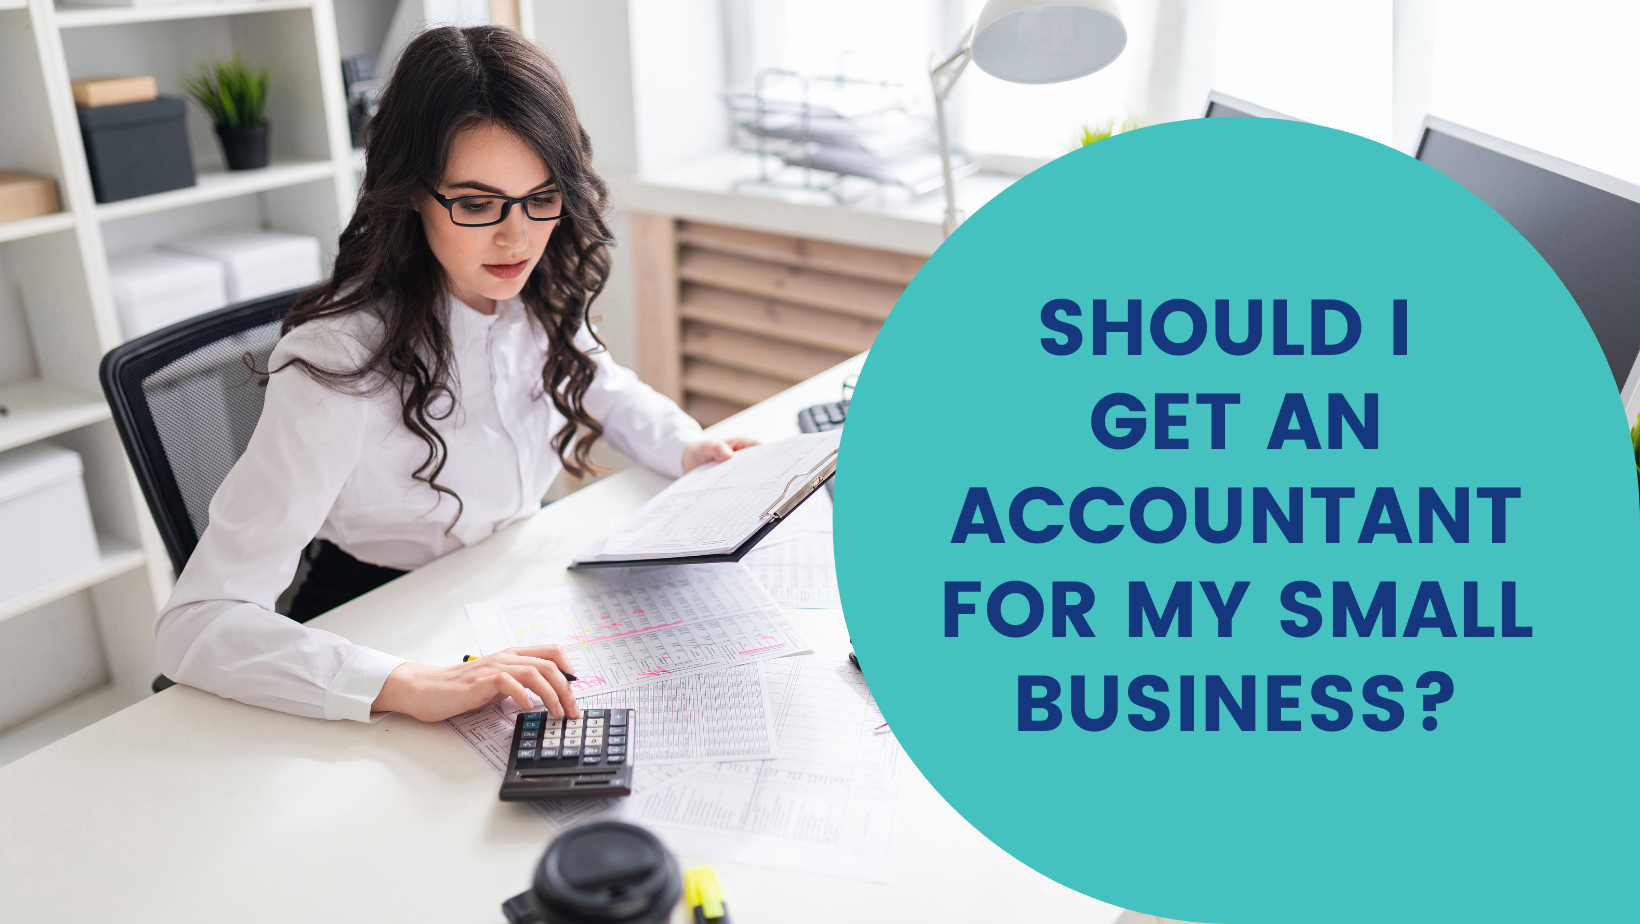 Should I Get an Accountant for My Small Business